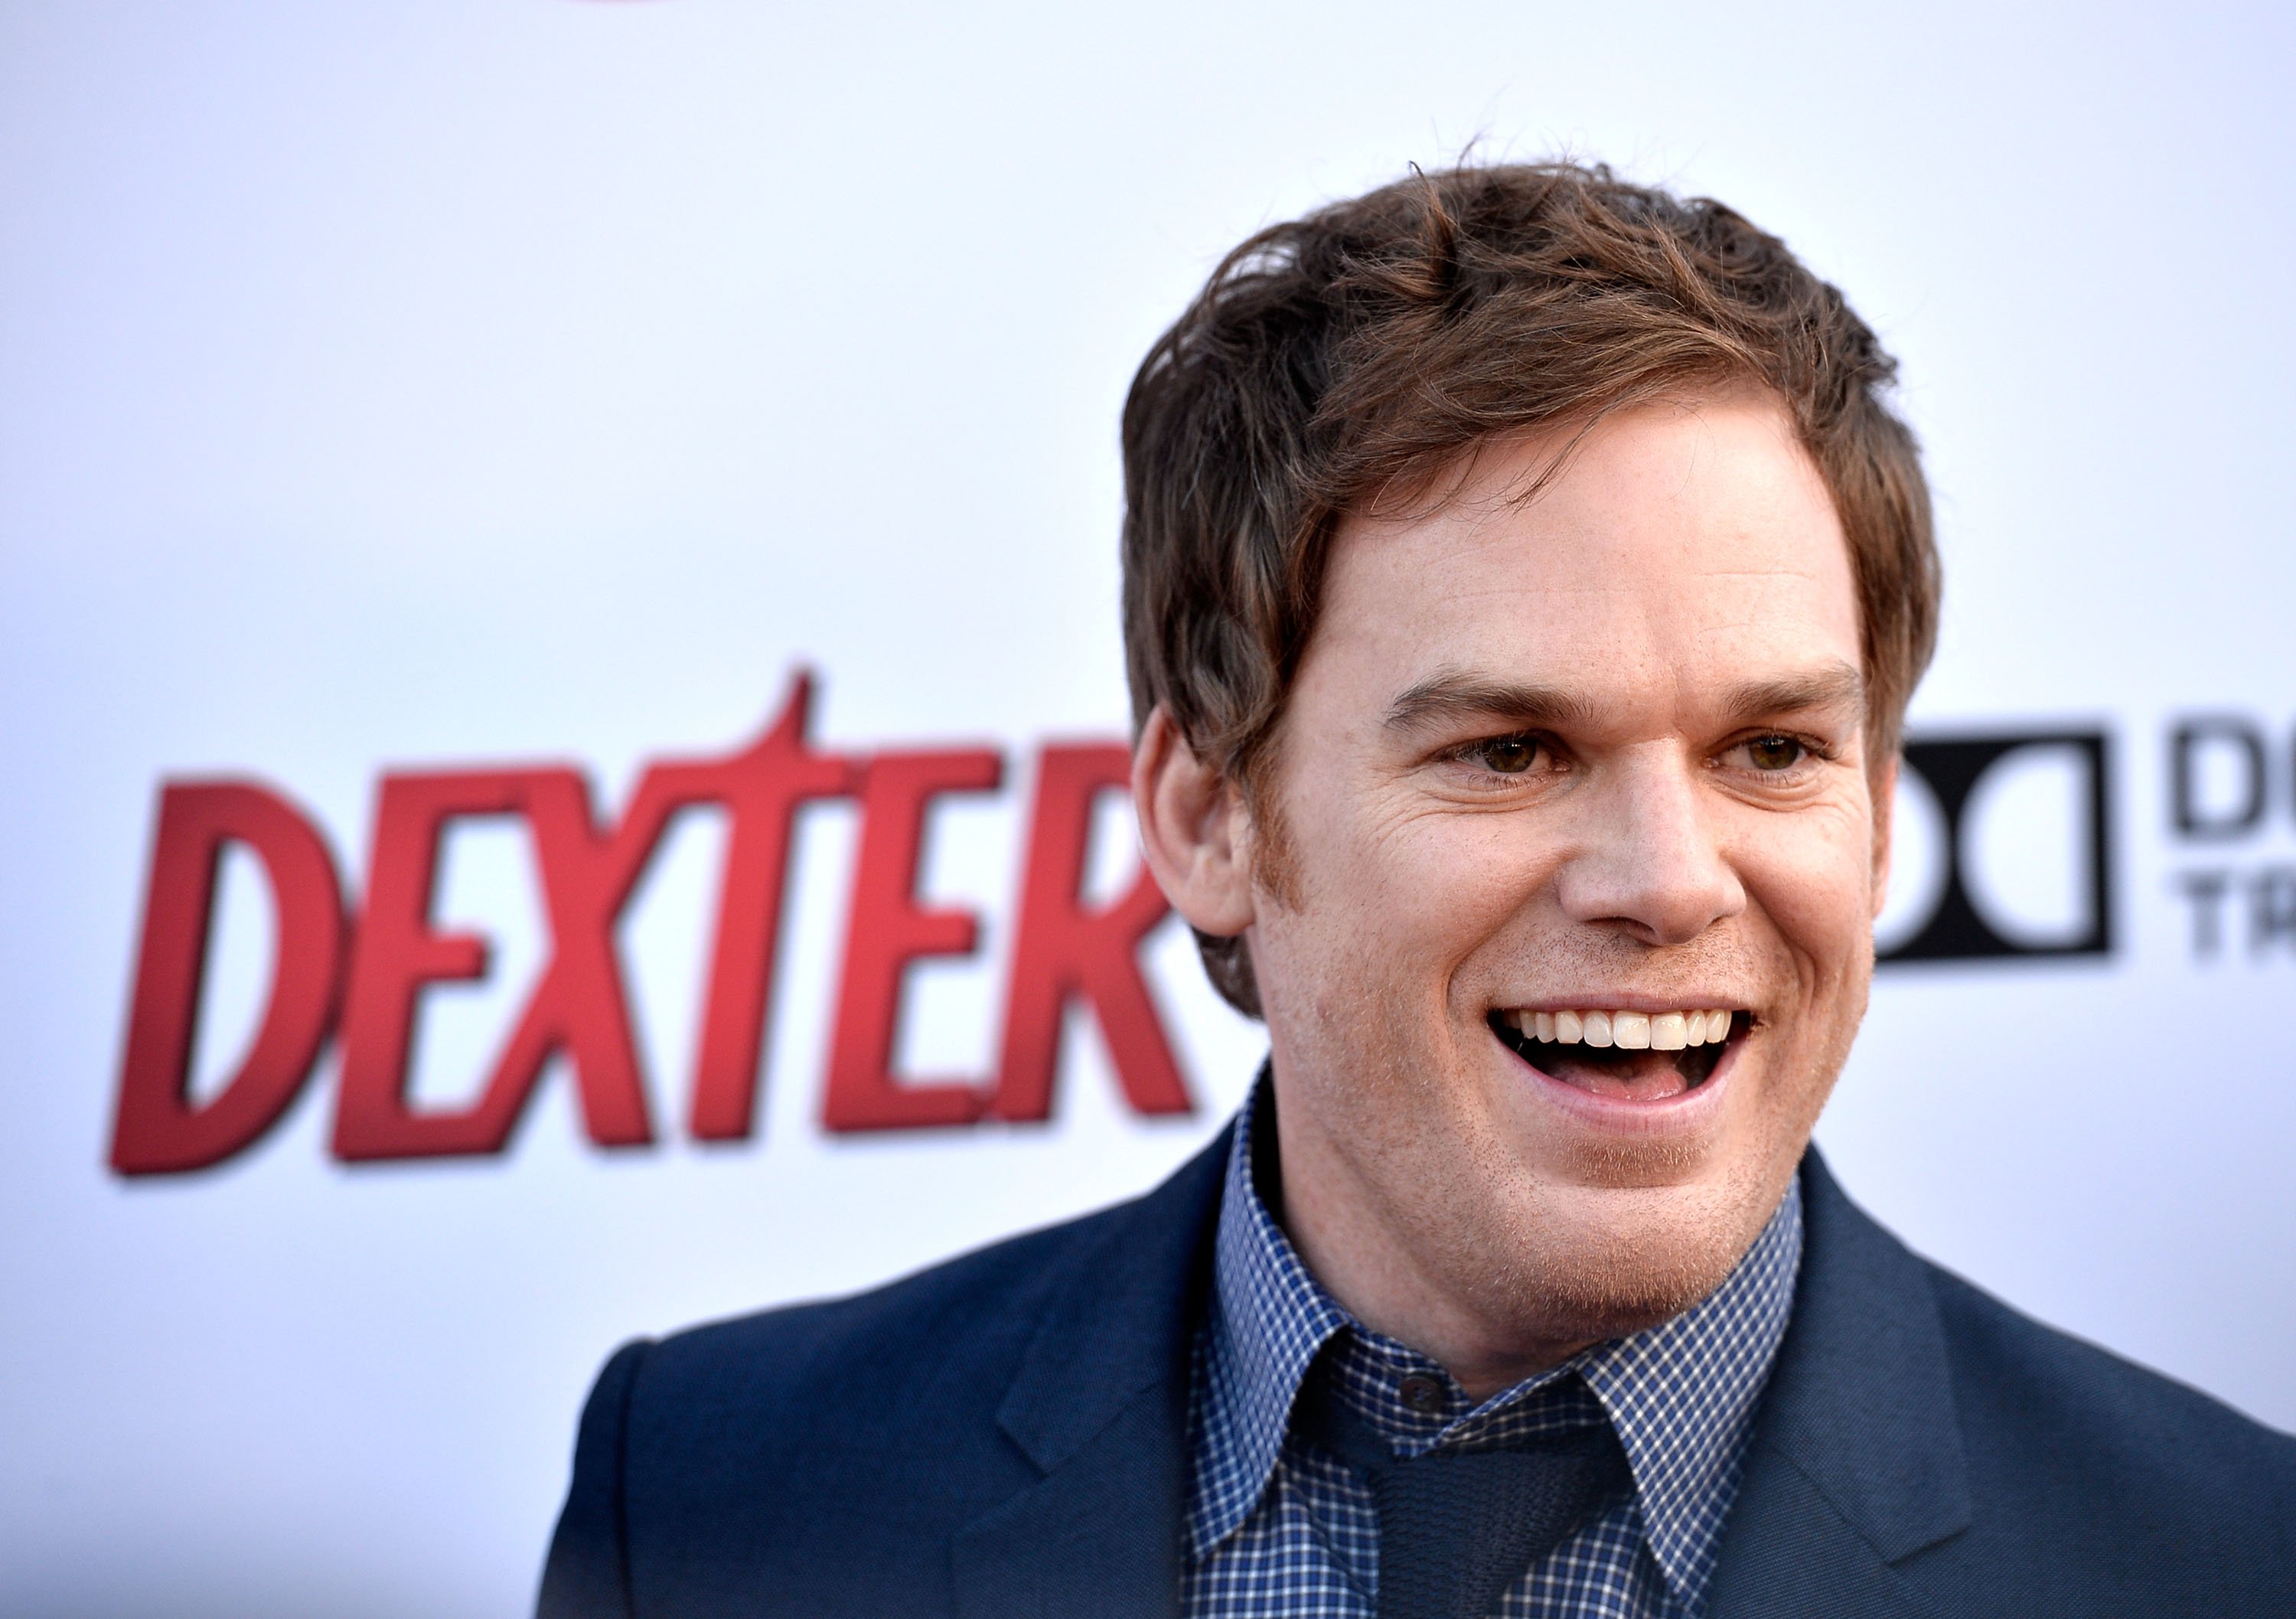 Michael C. Hall at the Showtime Celebrates 8 Seasons Of "Dexter" at Milk Studios in Hollywood, California on June 15, 2013 | Source: Getty Images